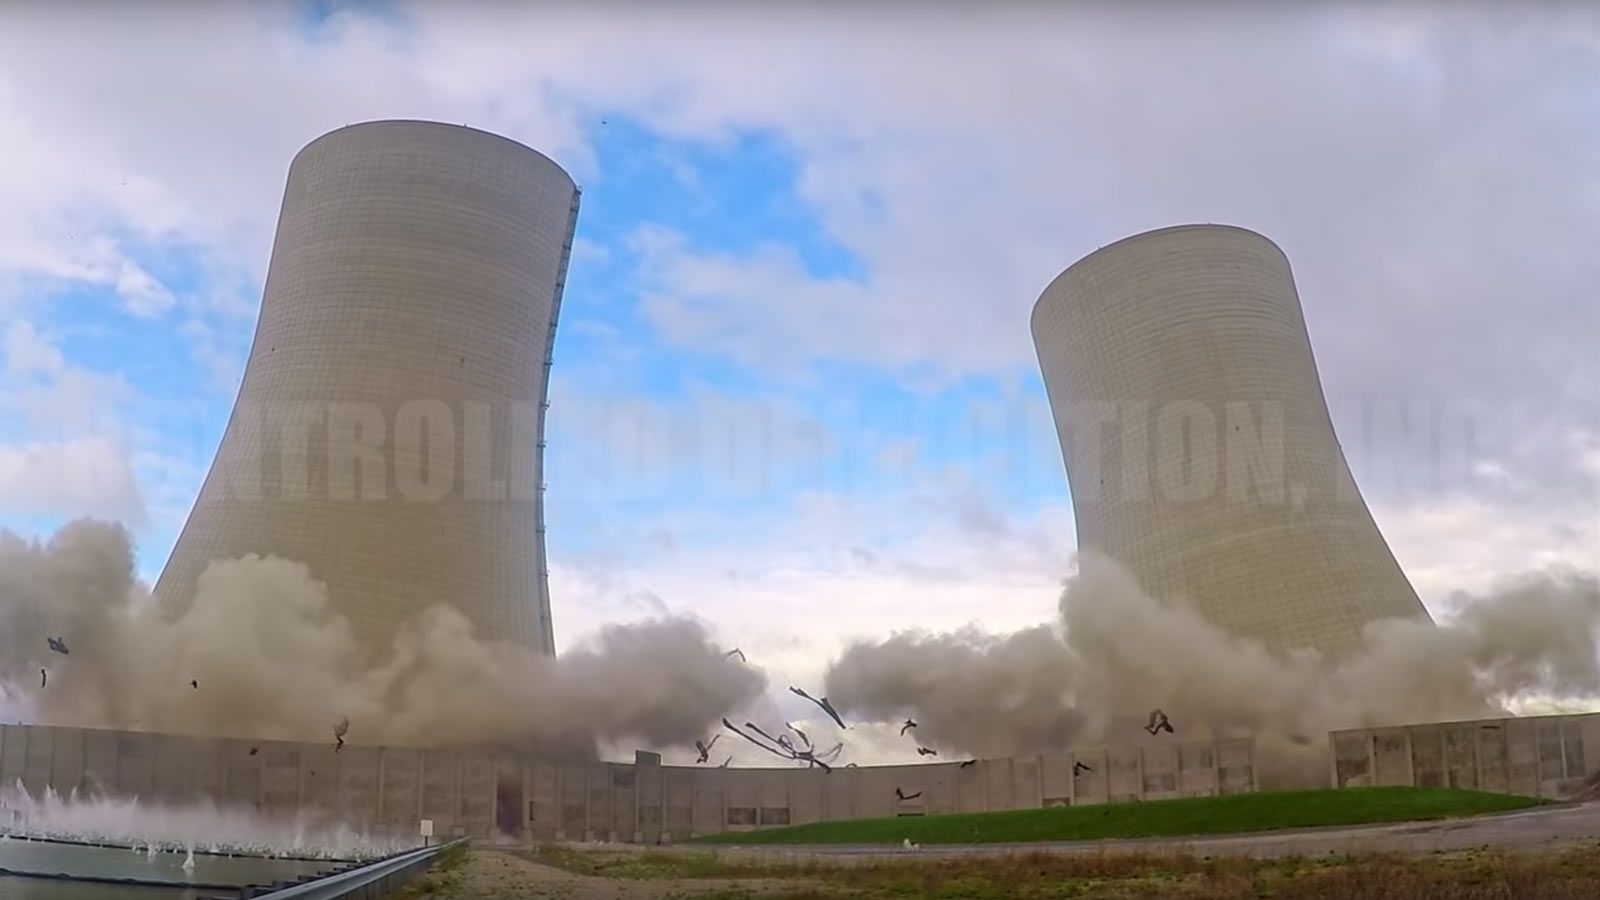 Unlike traditional demolition methods, controlled implosion is fast and efficient